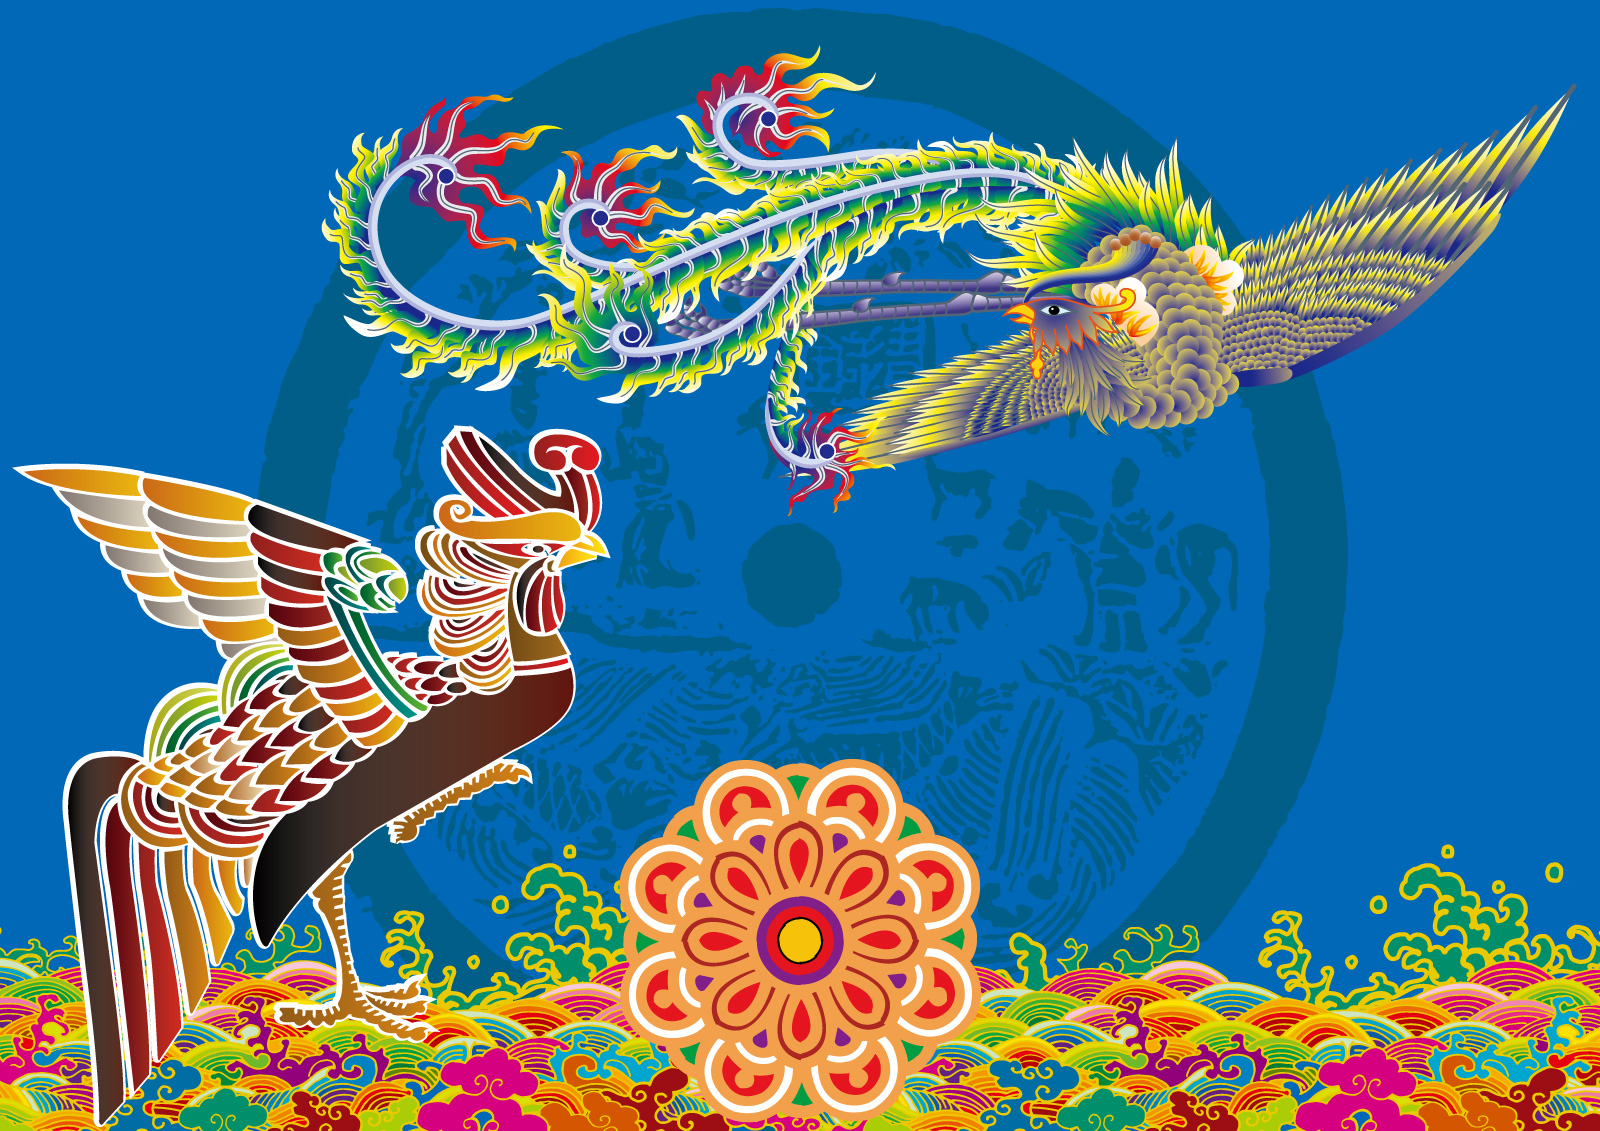 Chinese traditional style of the myth of the Phoenix legend - Illustrations Vectors AI ESP Free Download